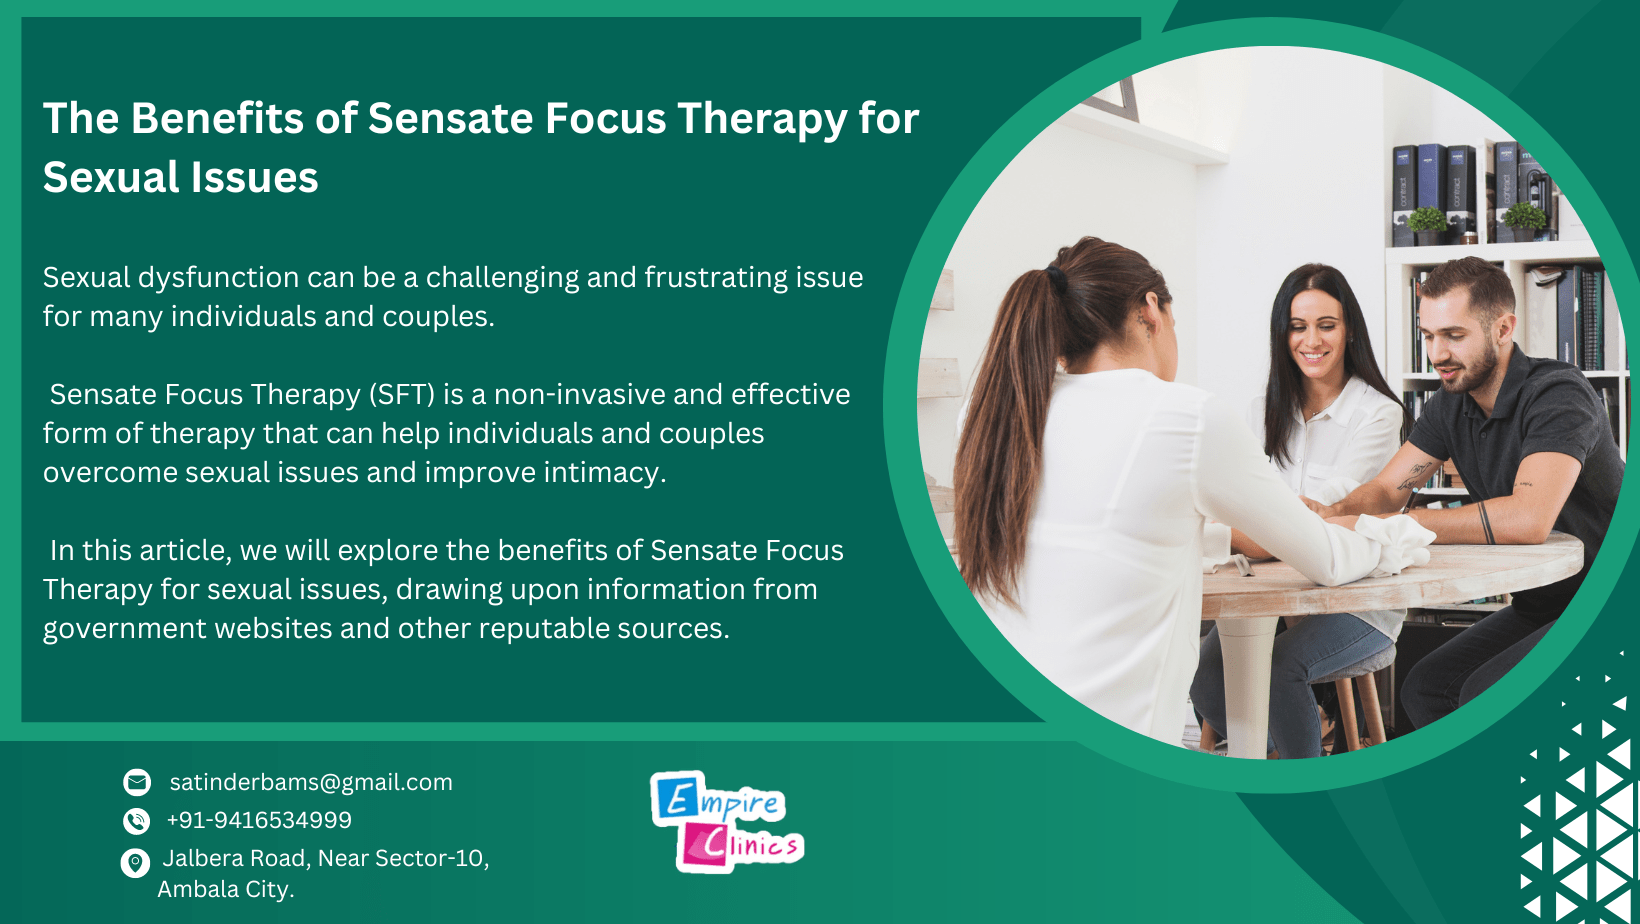 The Benefits of Sensate Focus Therapy for Sexual Issues